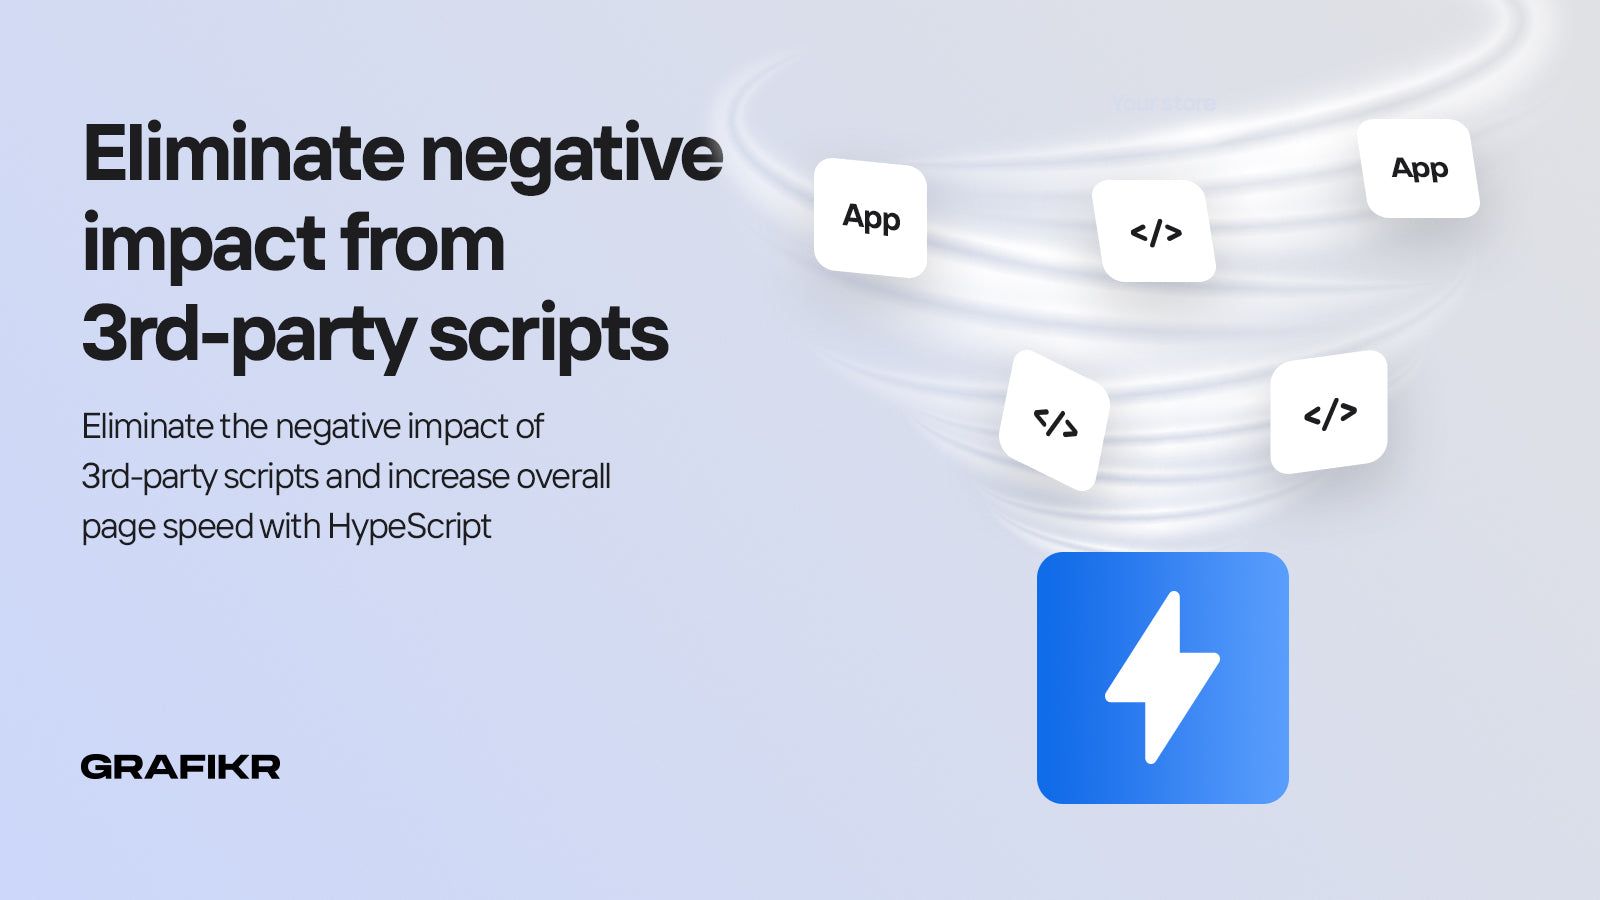 Eliminate negative impact from 3rd-party scripts